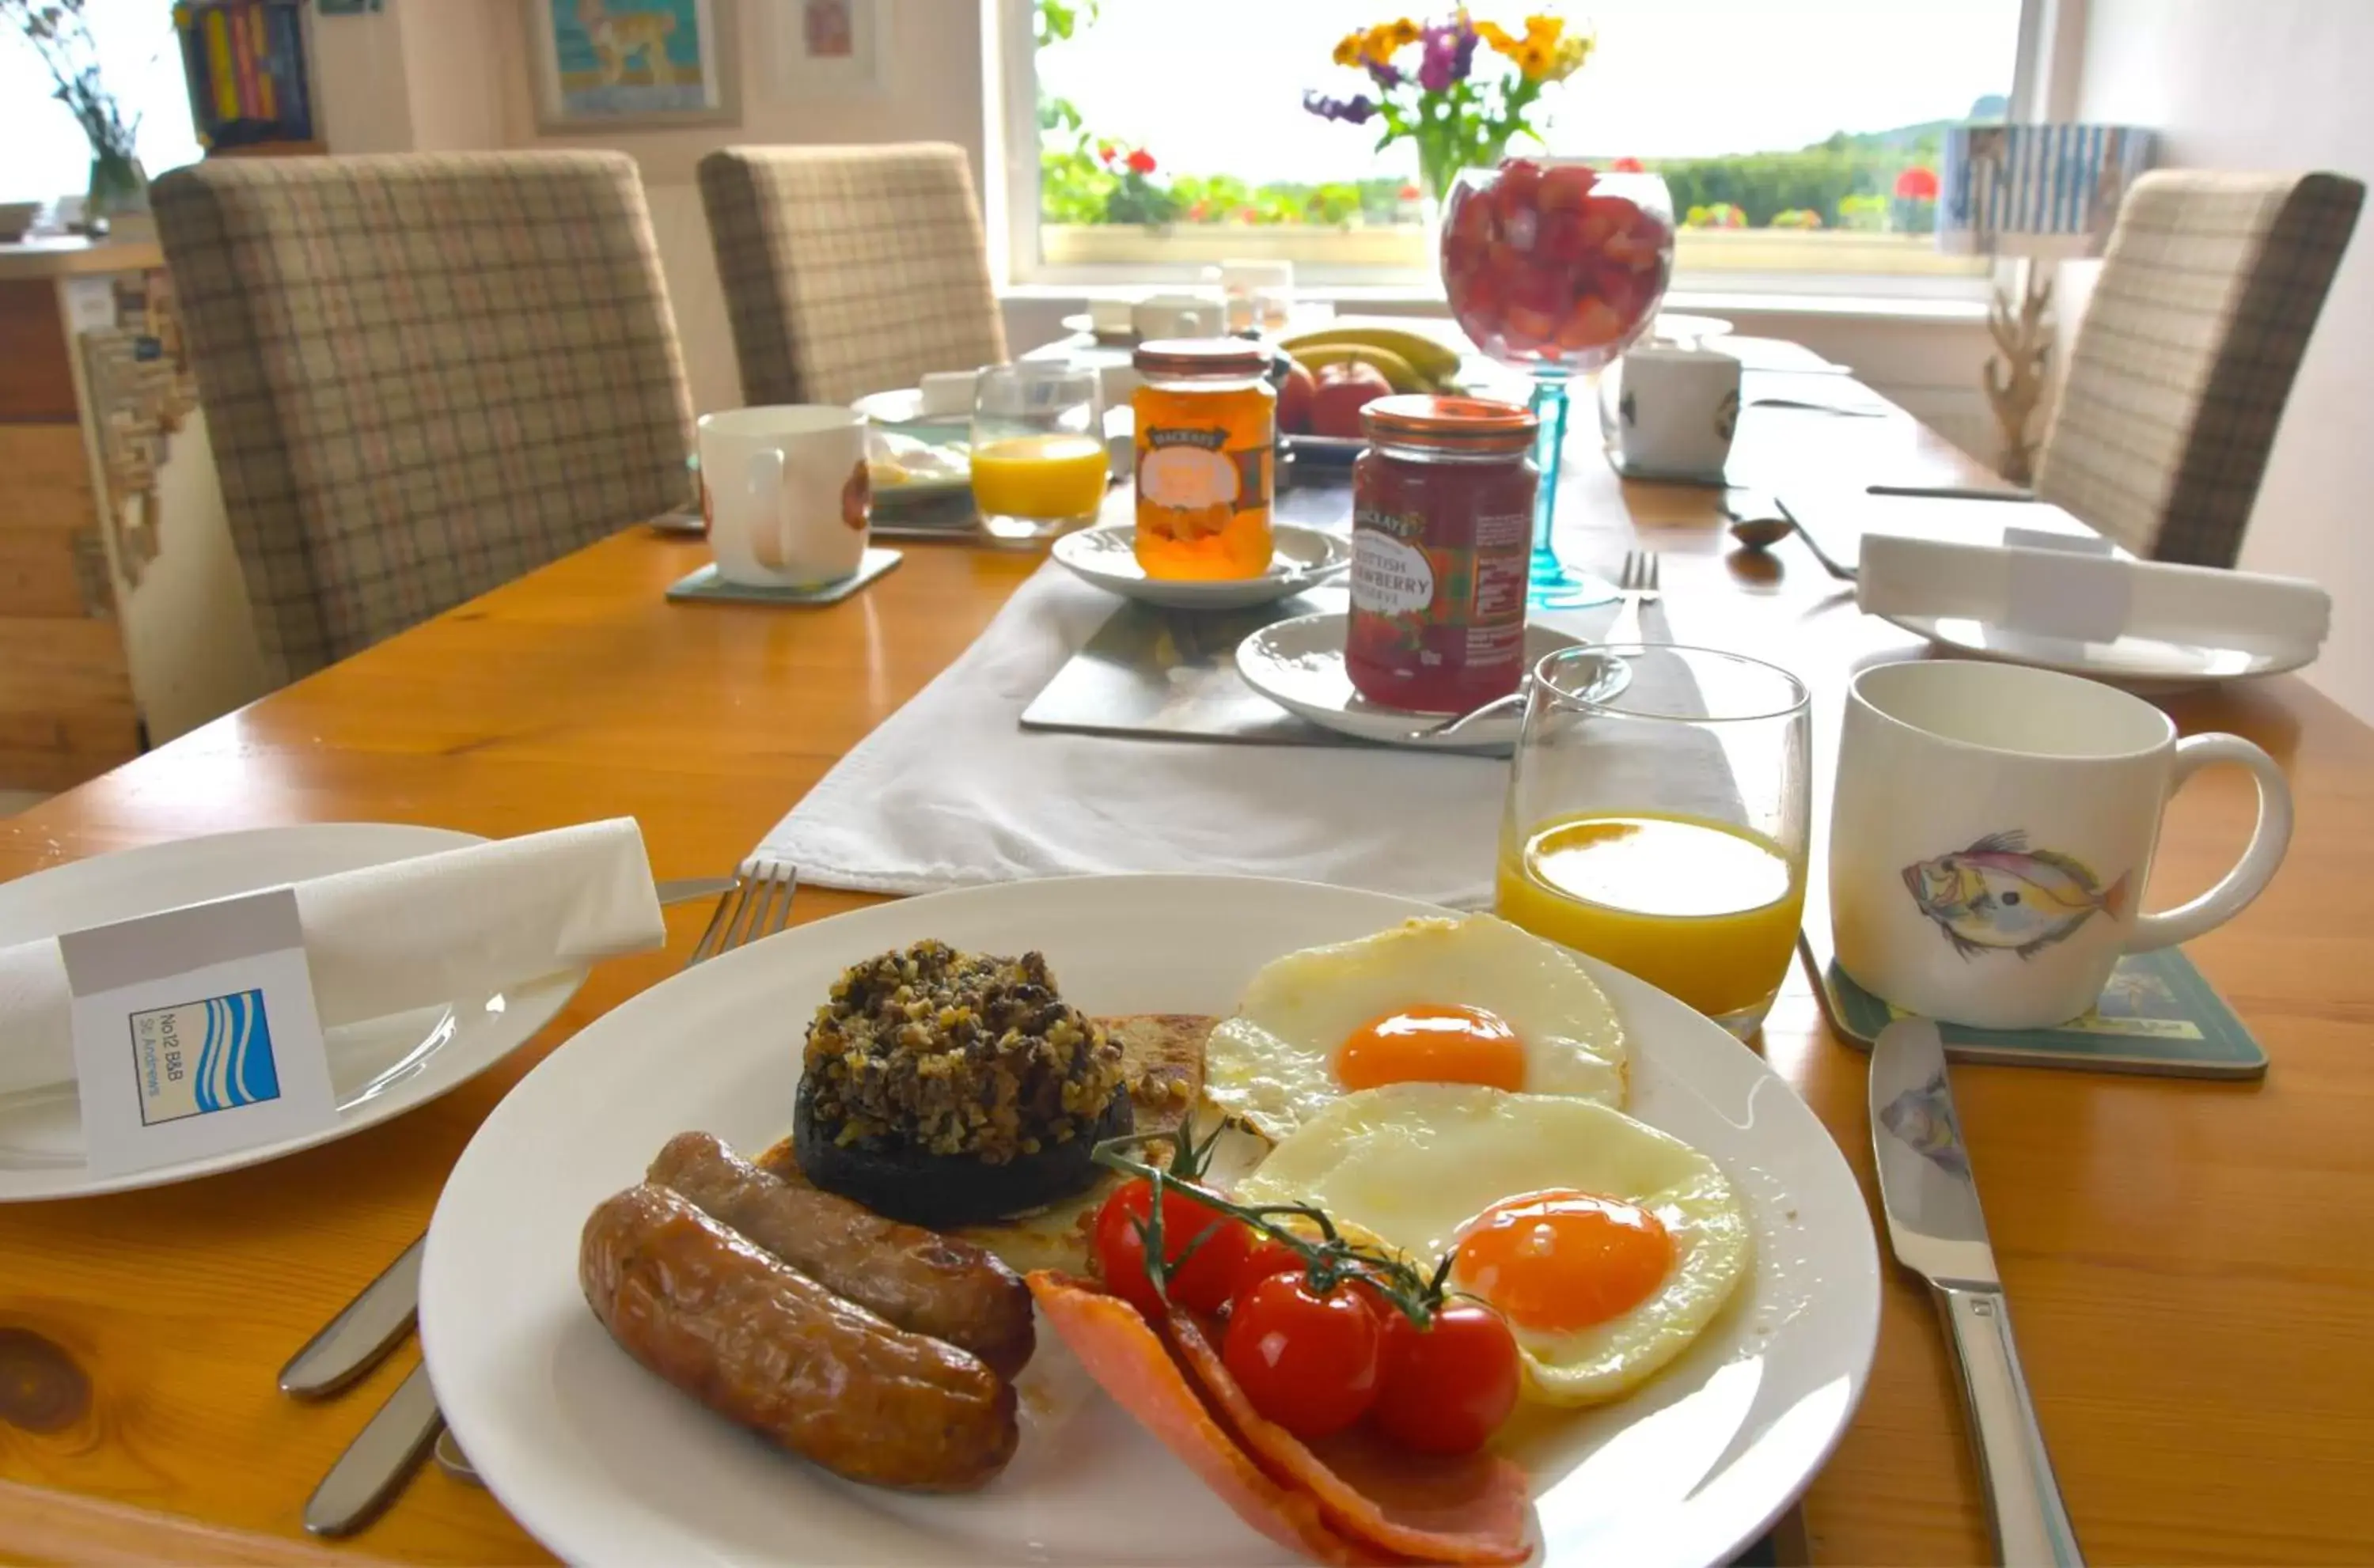 Food and drinks, Breakfast in No12 Bed and Breakfast, St Andrews